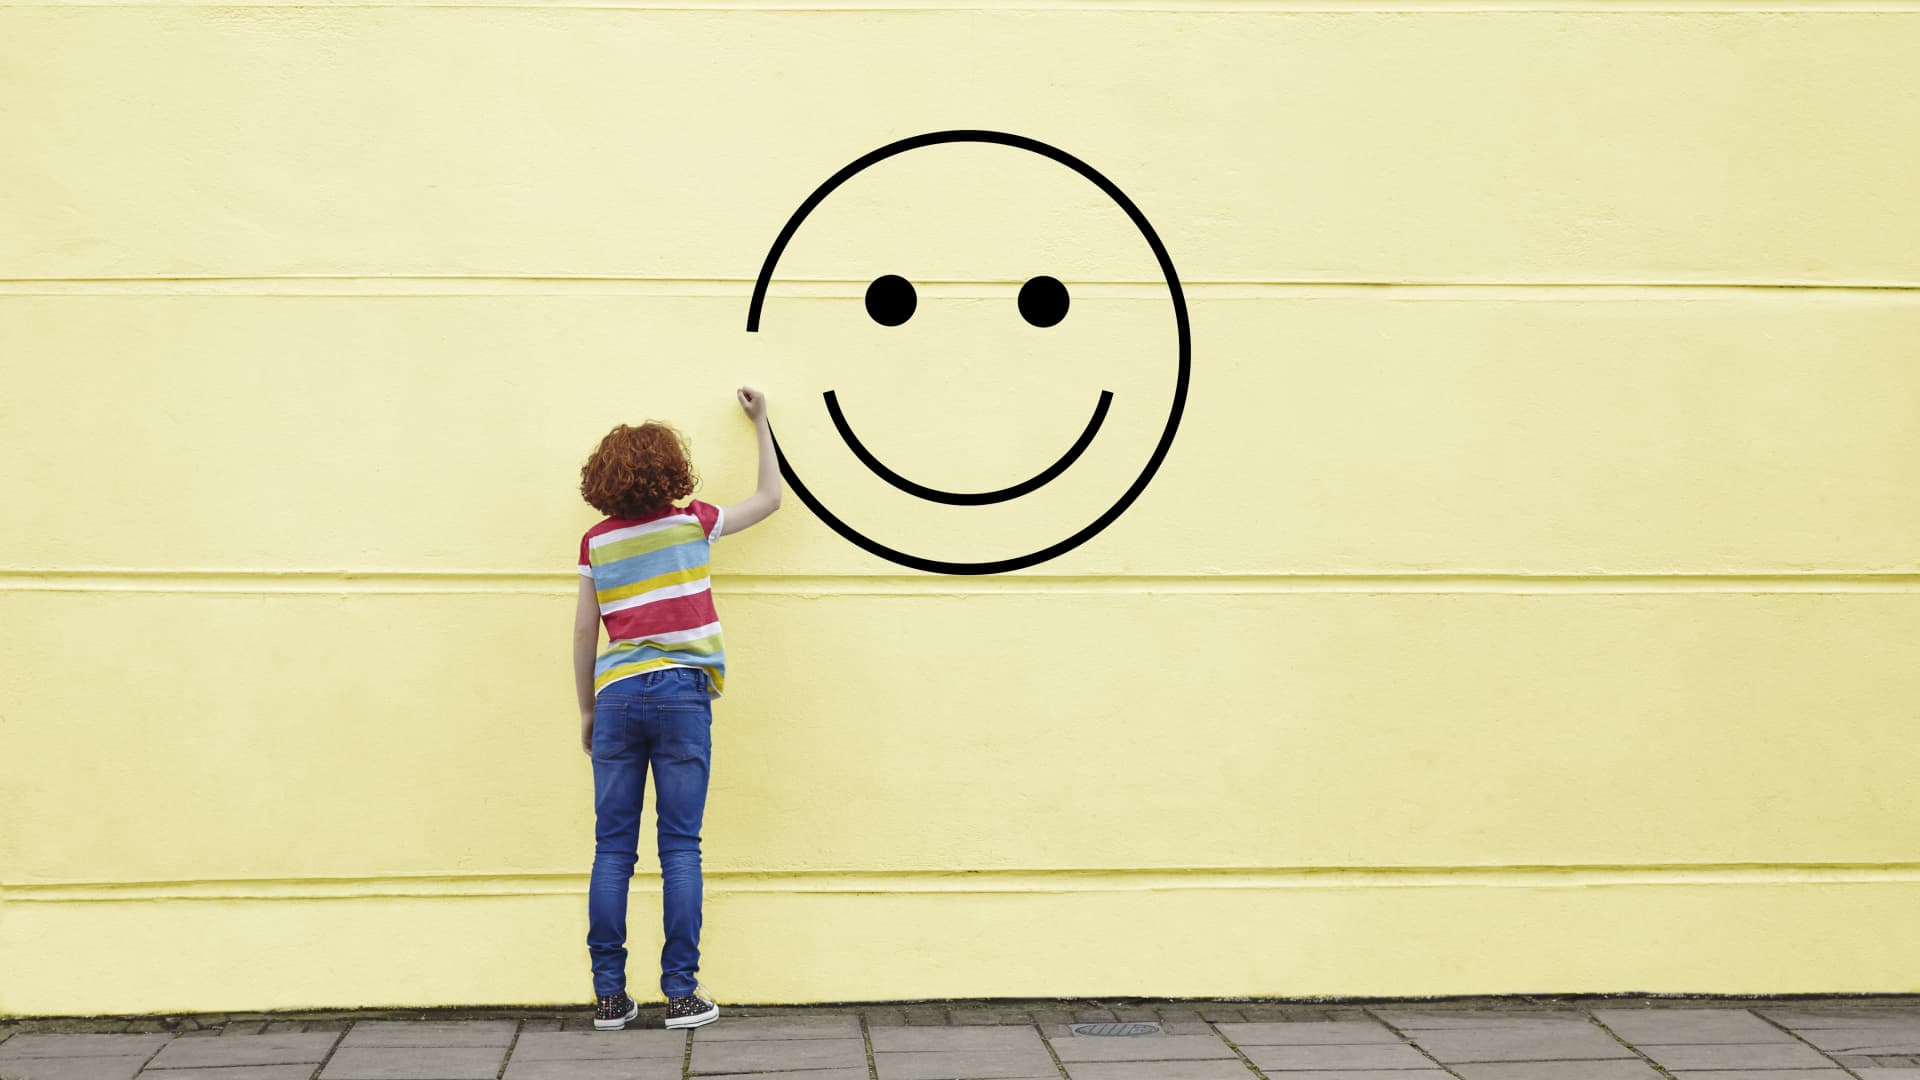 Harvard professor who teaches a class on happiness: The happiest people balance and prioritize 3 things